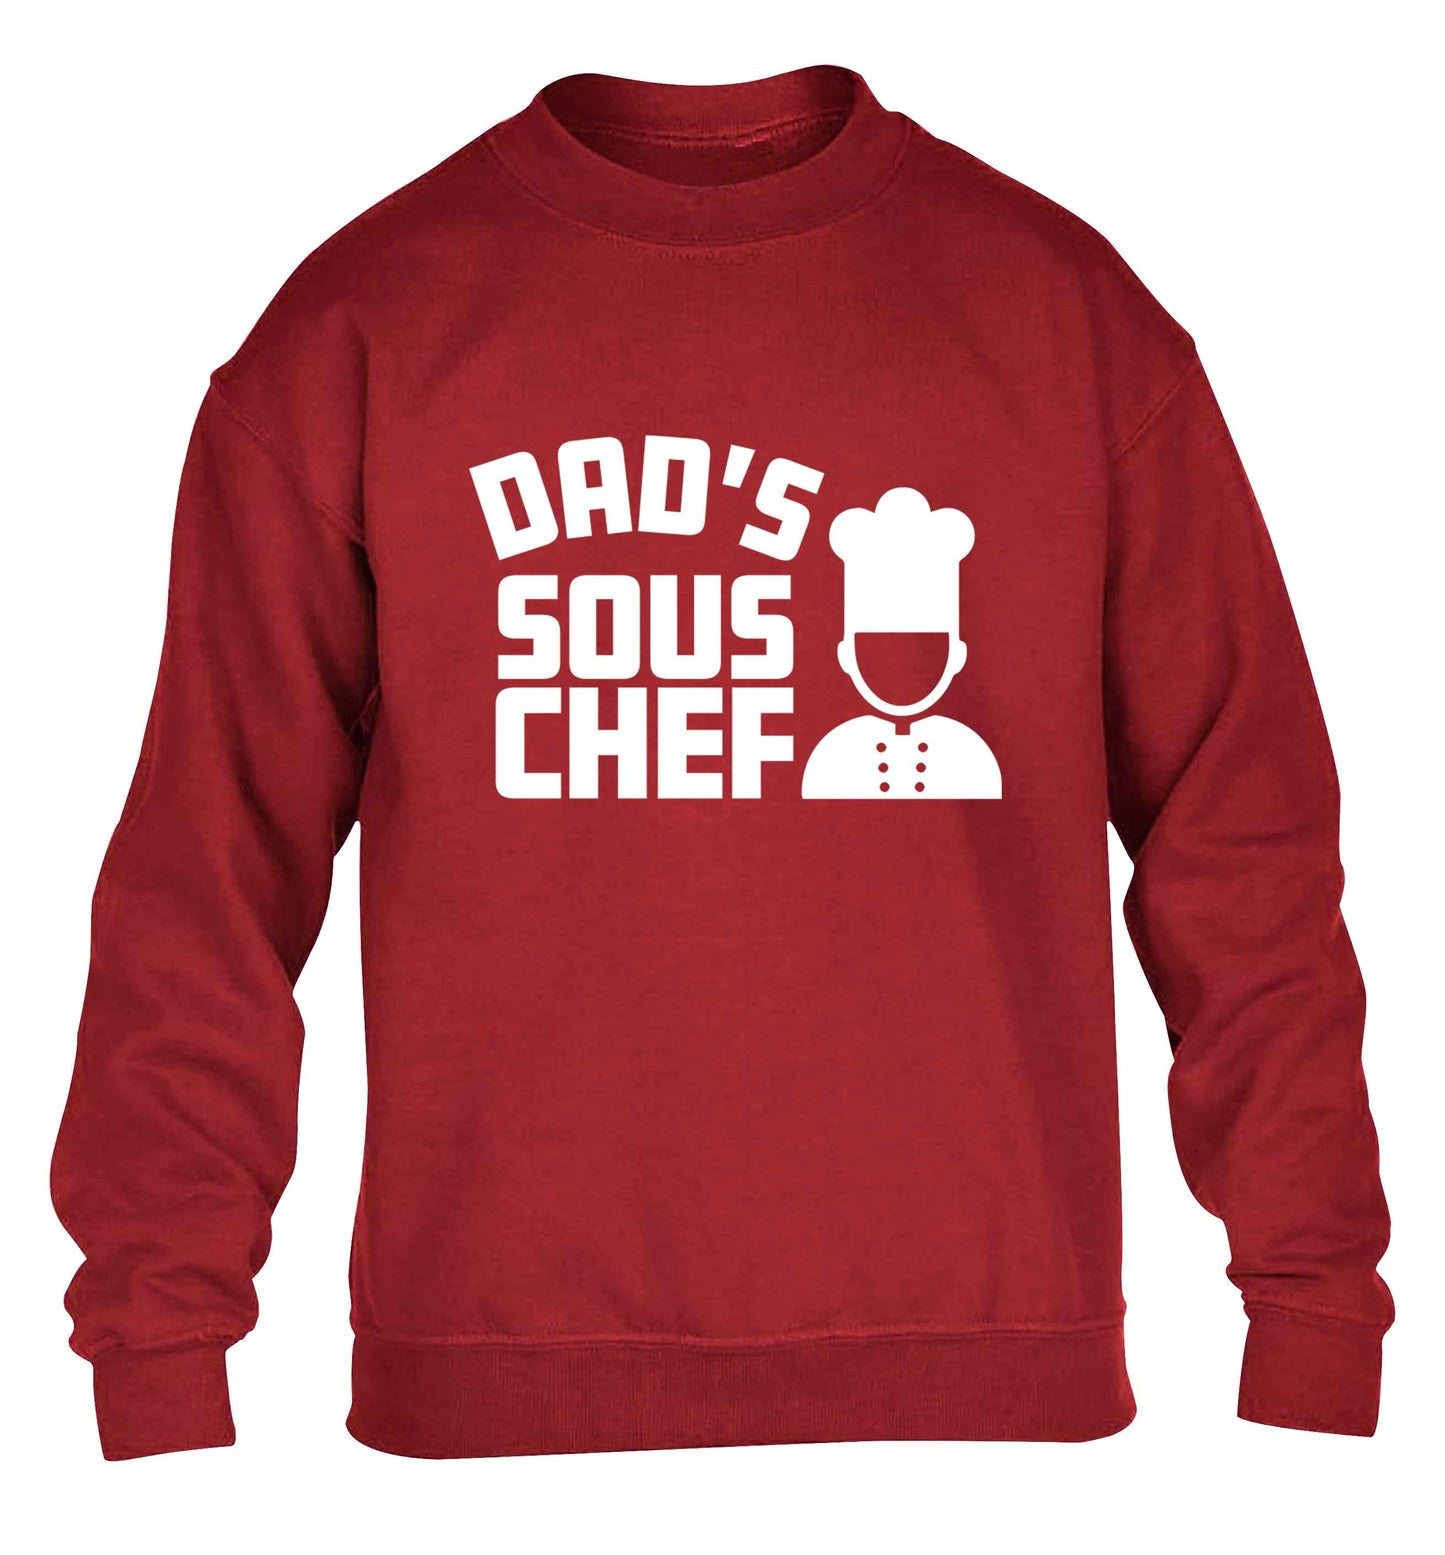 Dad's sous chef children's grey sweater 12-13 Years